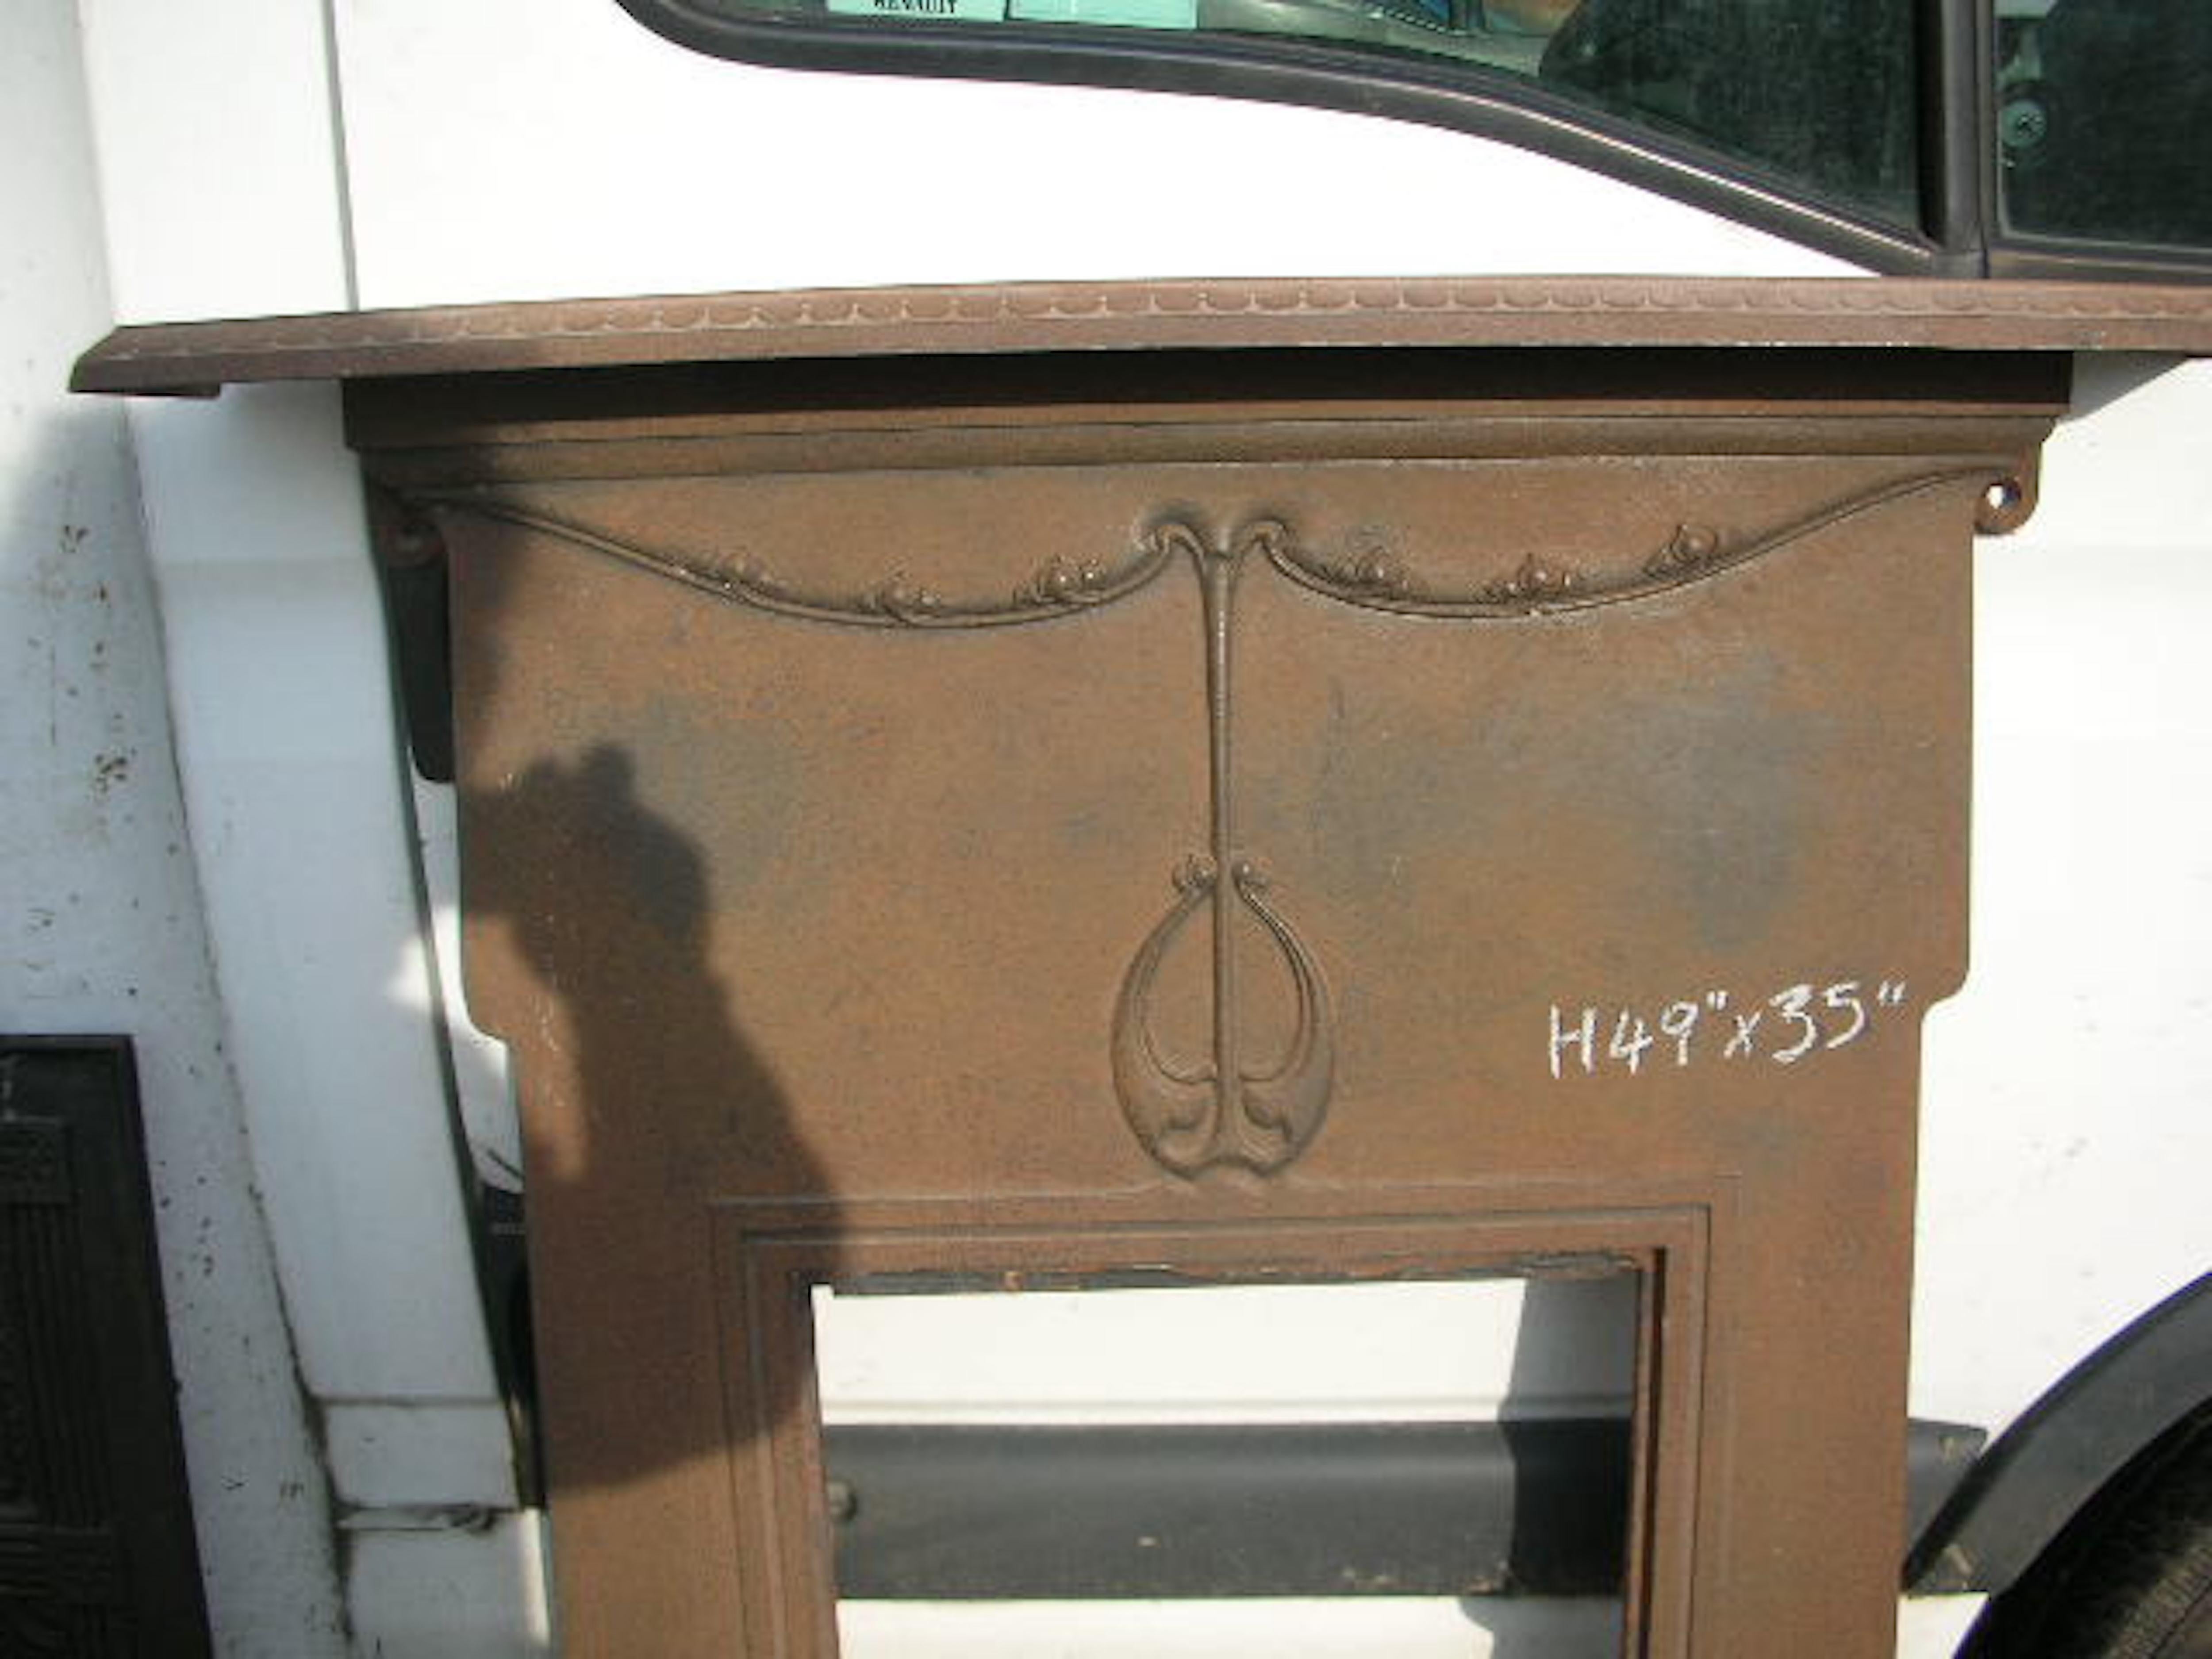 An Arts and Crafts / Art Nouveau period cast iron fireplace, the mantle with scalloped details to the edges. The main body with a central upper stylized floral seed pod detail, growing up and flowing to each side with sweet little three leaf